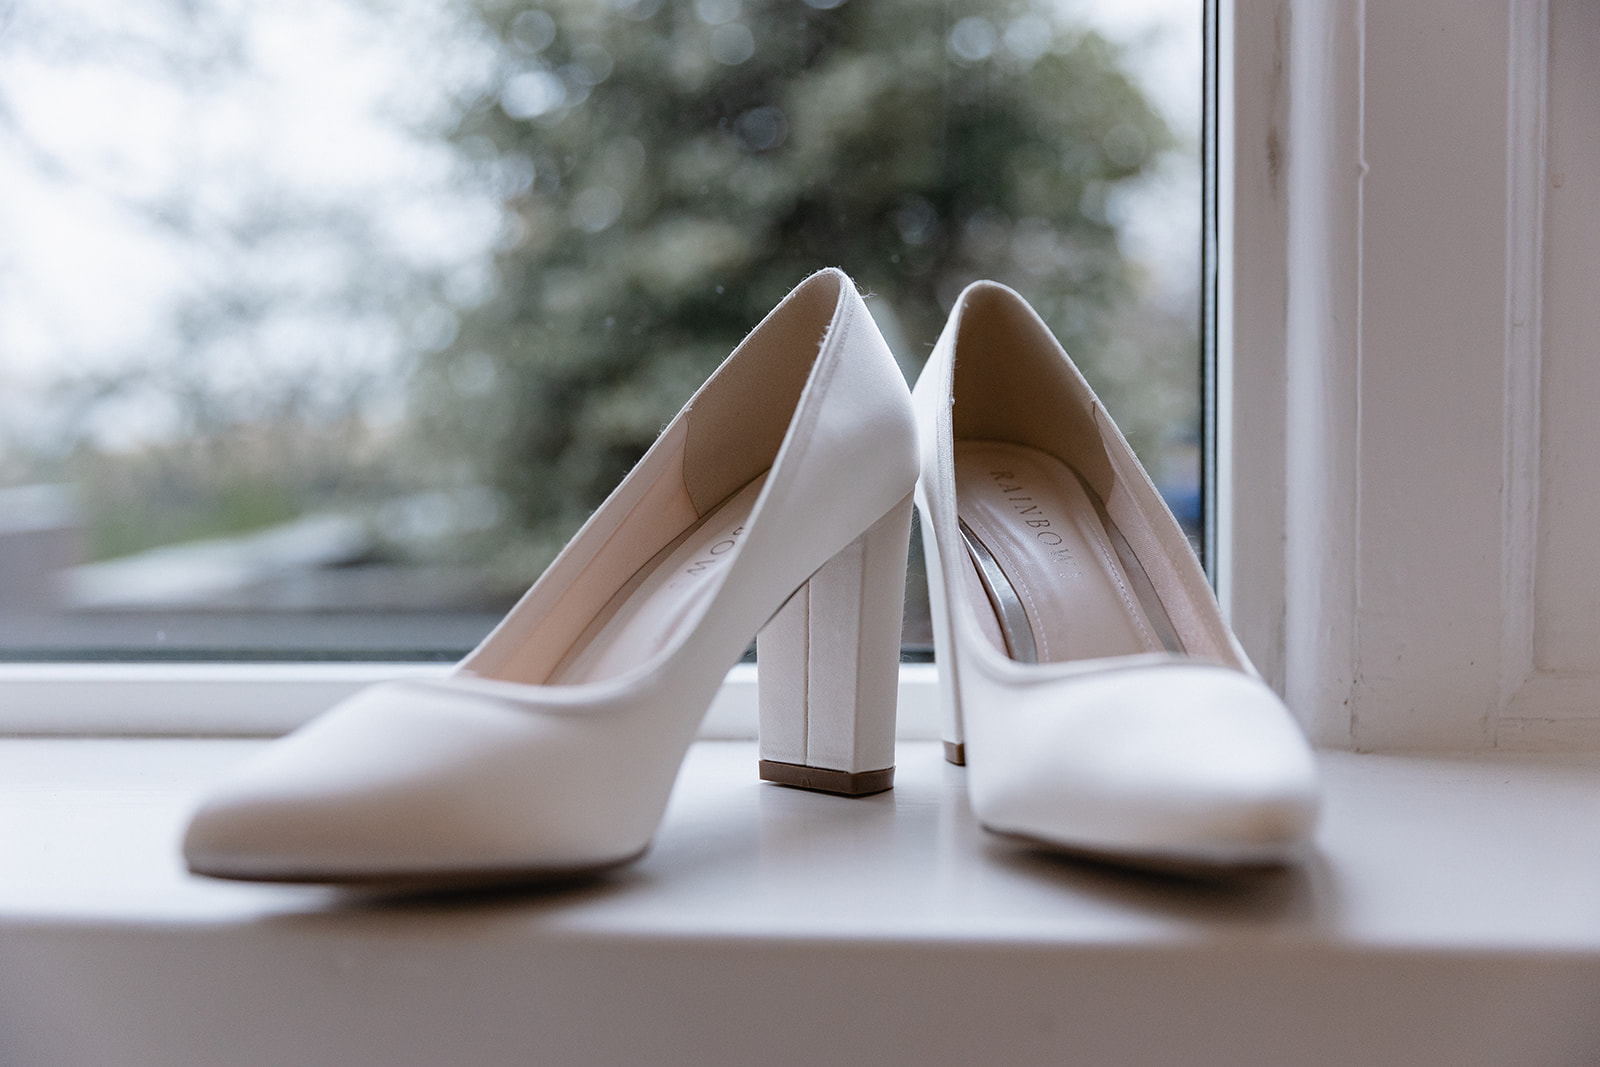 wedding shoes by the window- Cairns Farm Estate